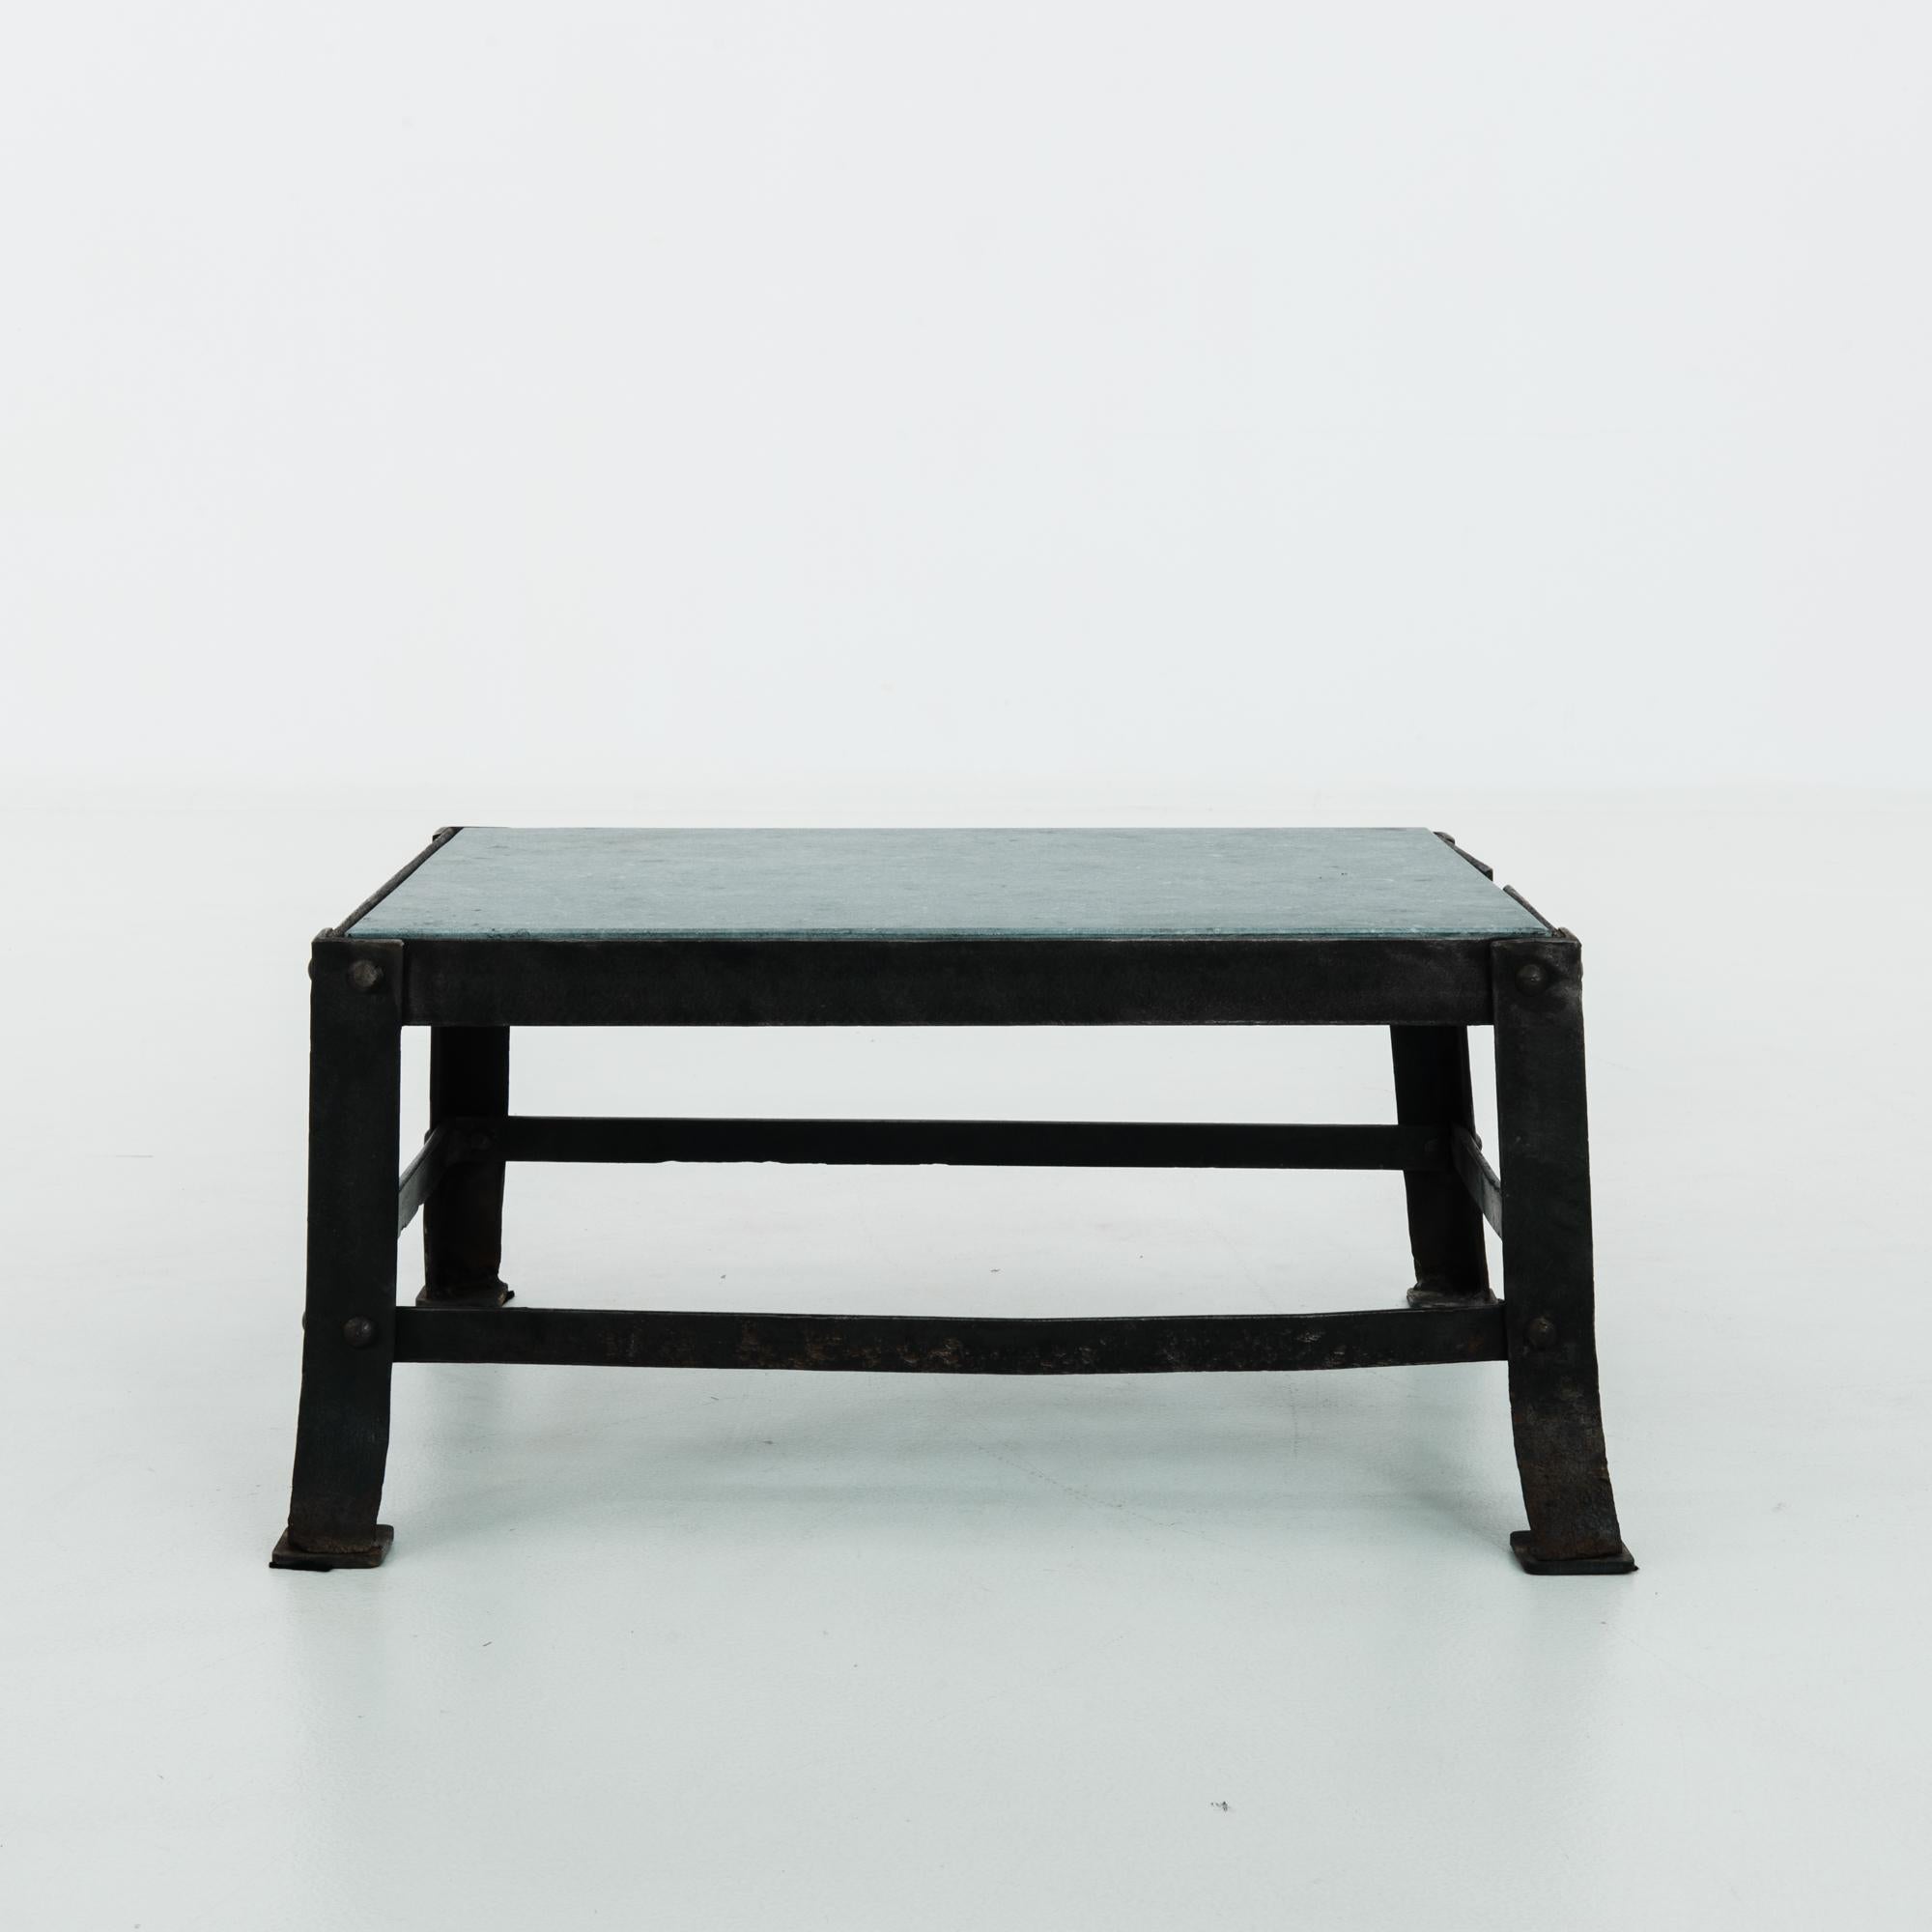 A stone topped metal table from Belgium, circa 1900. The steel frame creates a structural base, thick metal bars are riveted firmly in place, echoing the industrial effect. Metallic iron is softened by a black polished finish, while a slab of